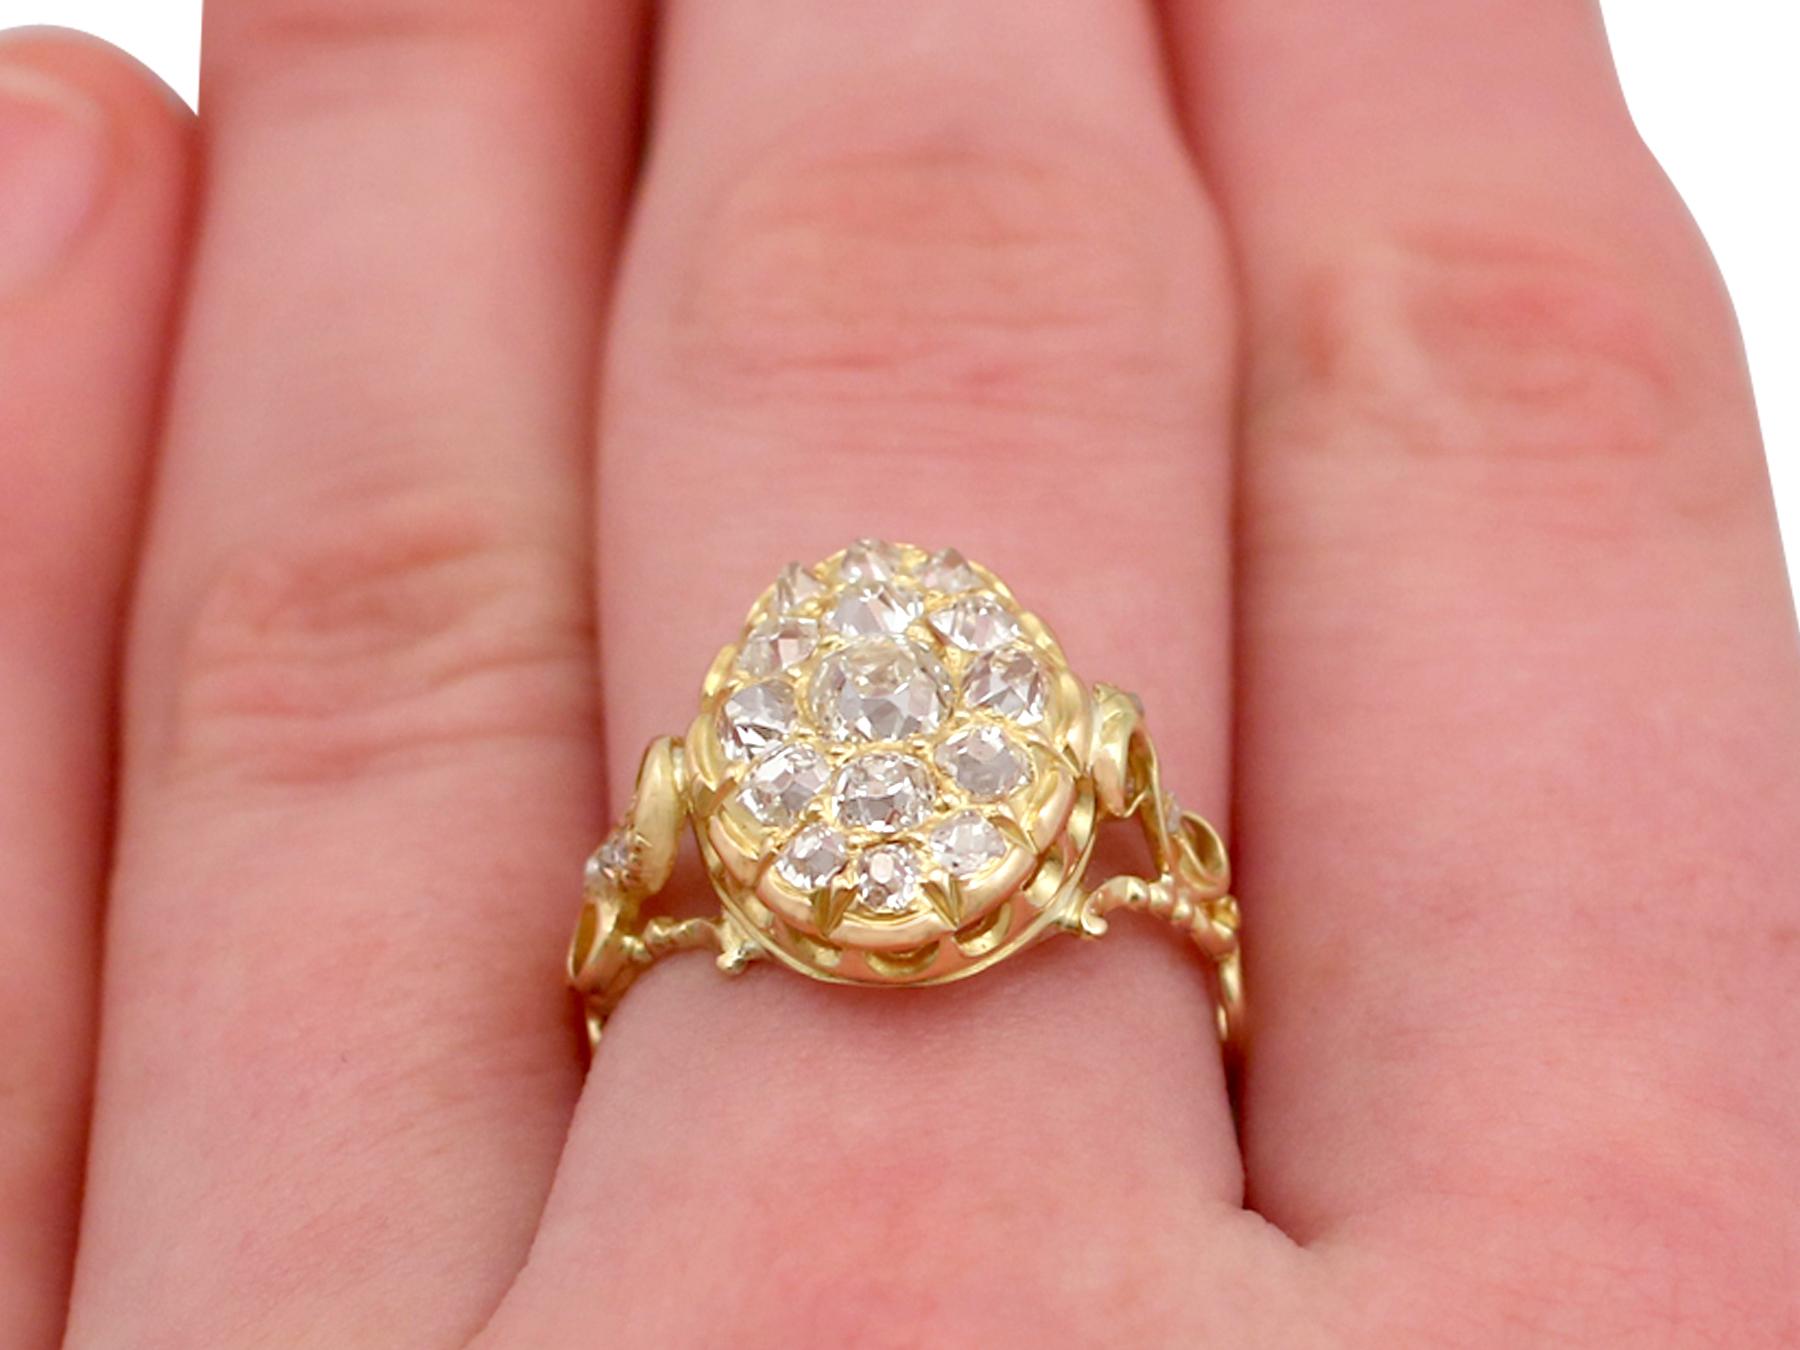 1870s Antique Victorian 1.51 Carat Diamond and Yellow Gold Cocktail Ring 5